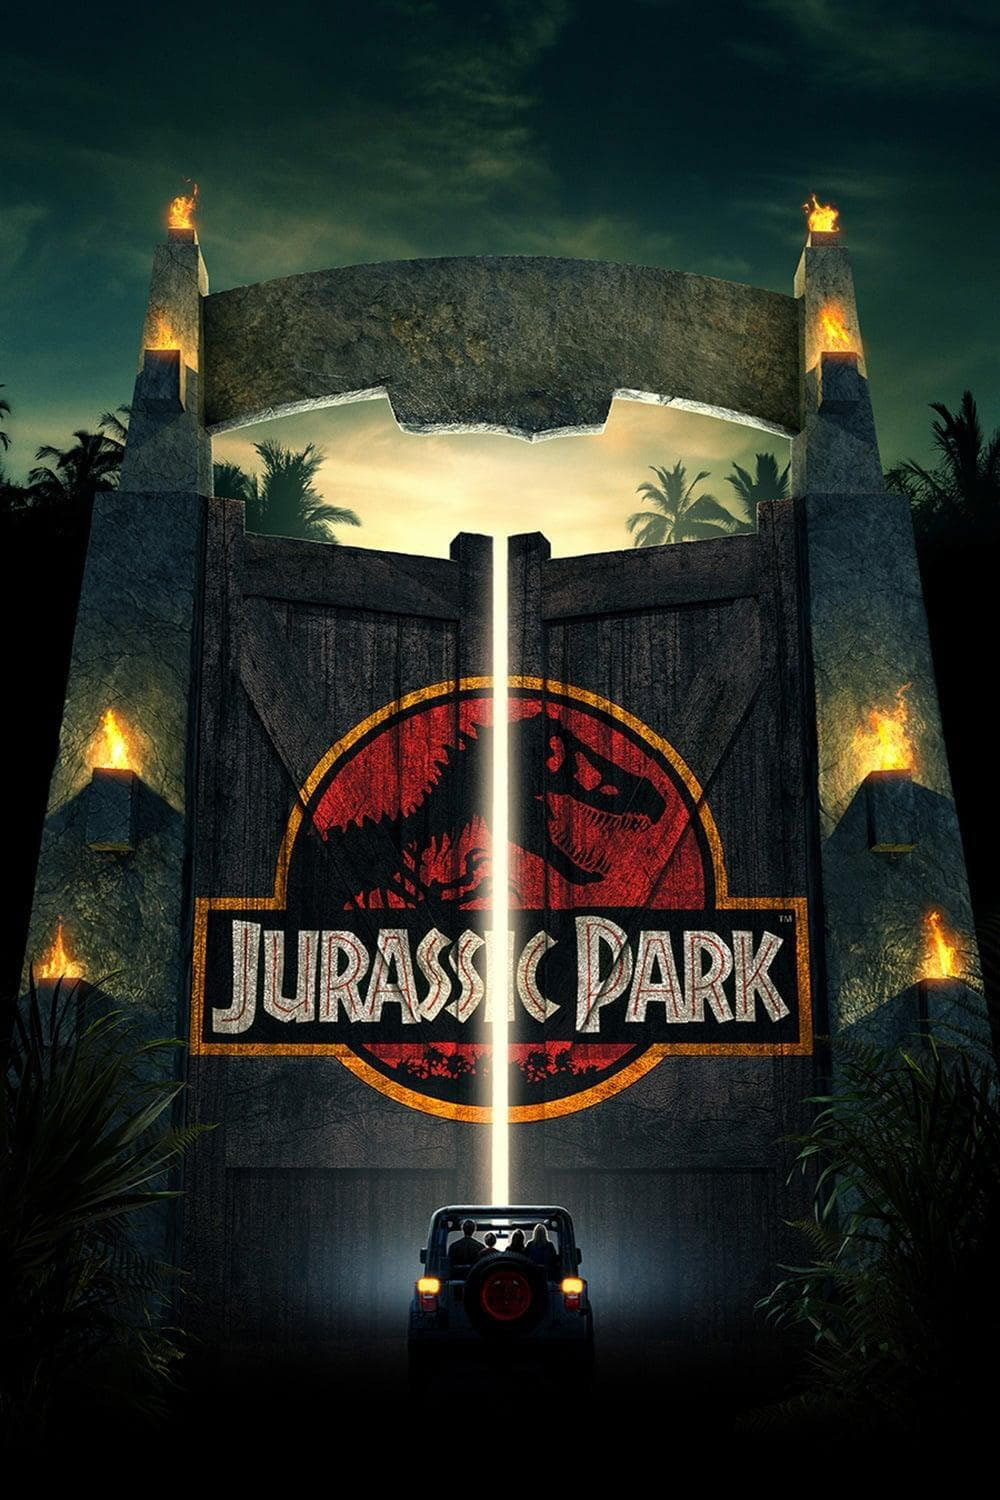 A movie poster reading "Jurassic Park" featuring a red logo with white text and the black silhouette of a dinosaur skeleton, on a large fence made from wood and concrete.